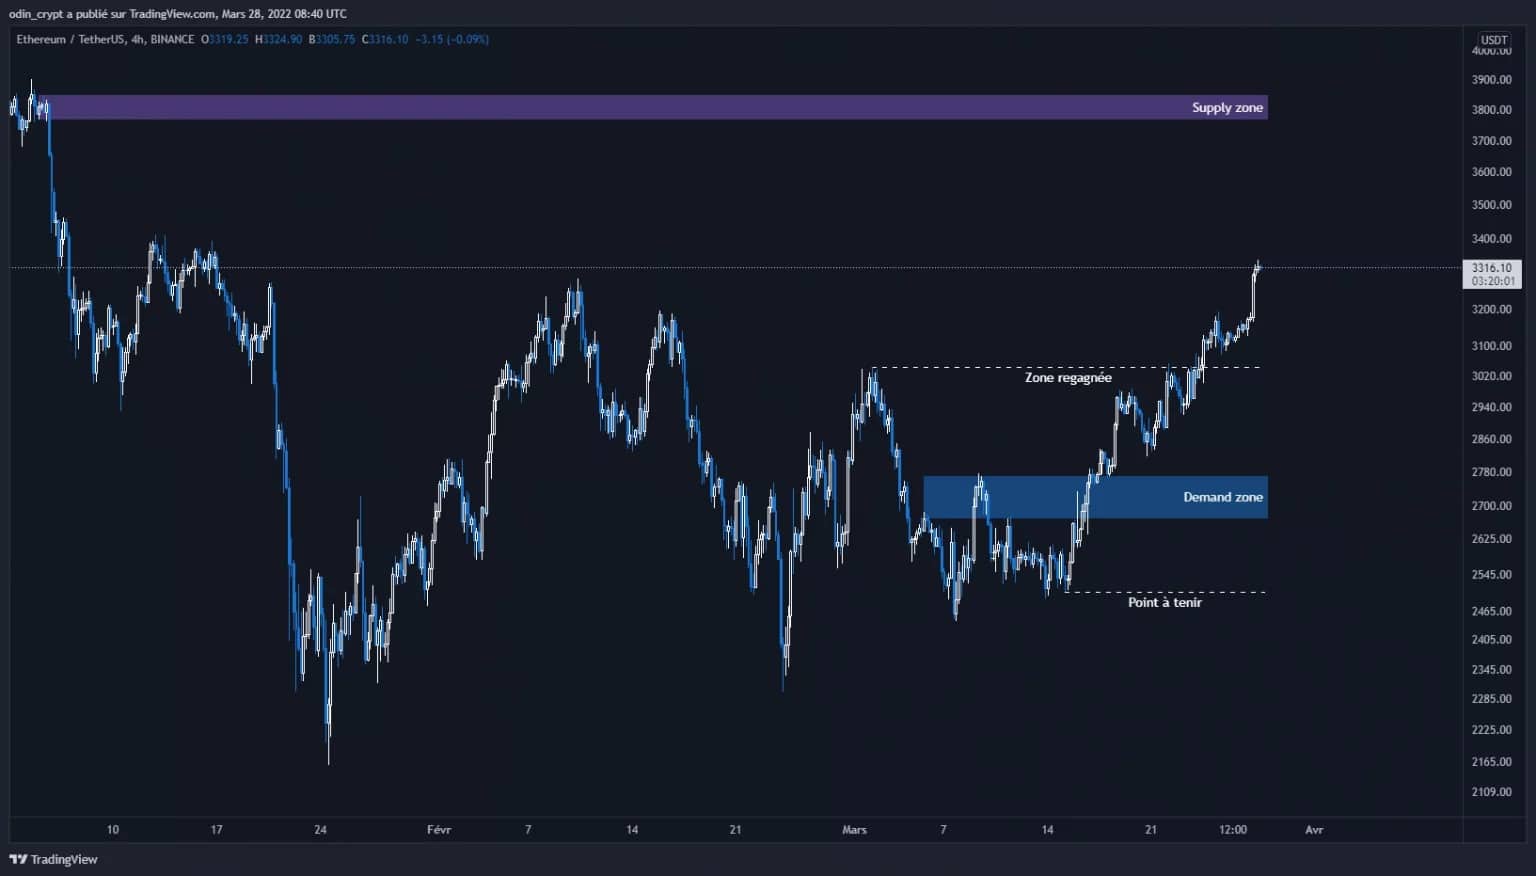 Ether (ETH) analyse in 4h